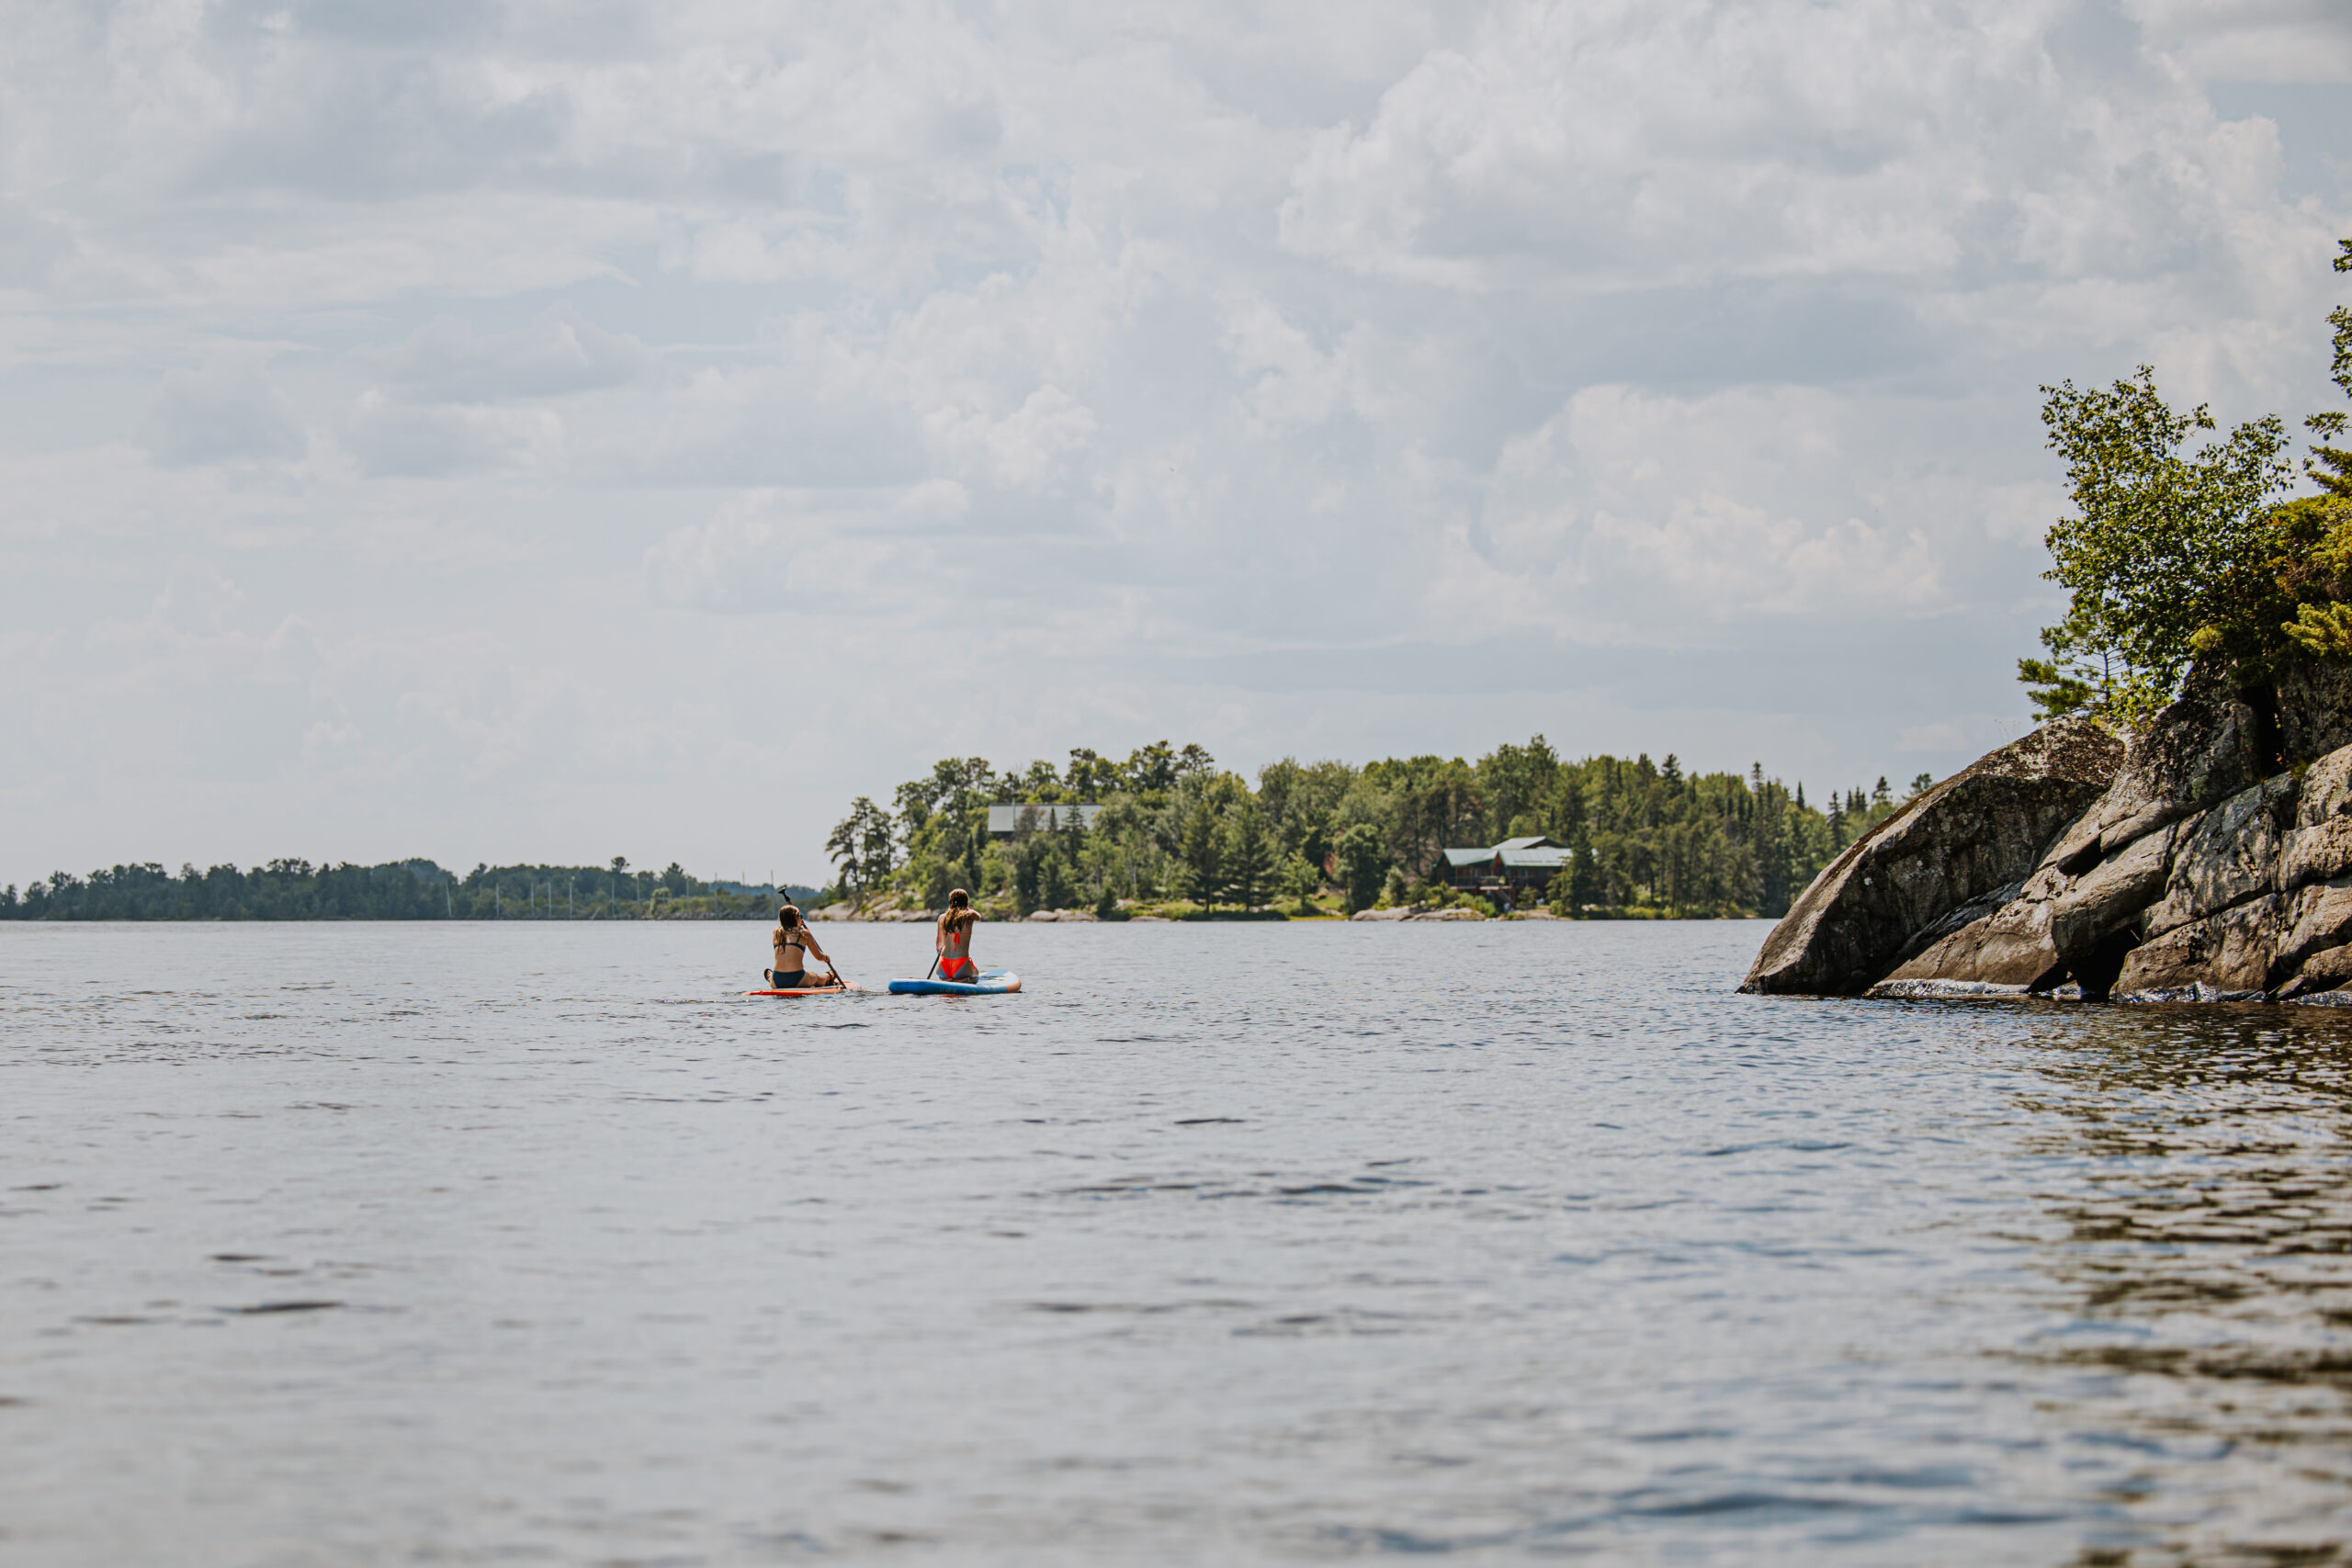 Two girls off on the distance on paddlebaords in Rainy lake. Large granite boulders off to the right. Sunny day with big puffy clouds in the sky.